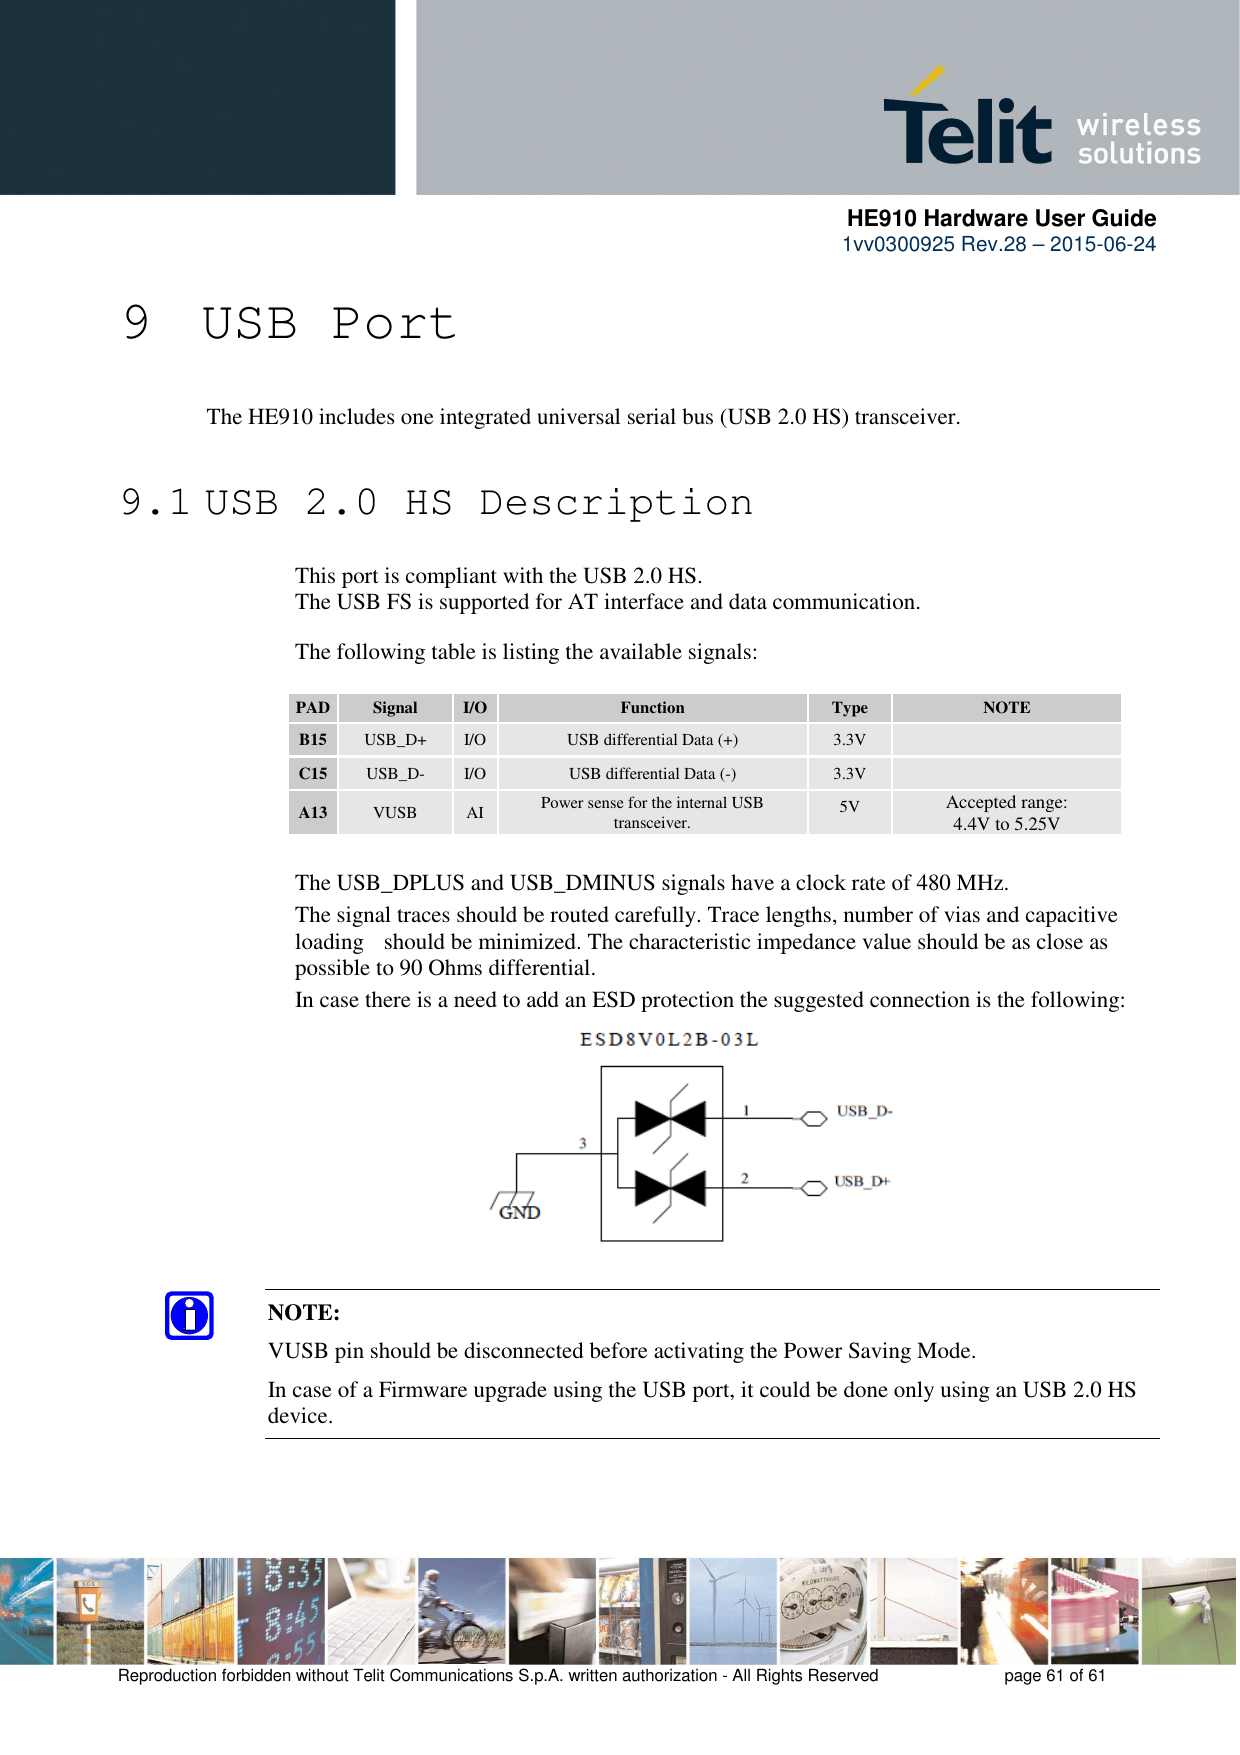      HE910 Hardware User Guide 1vv0300925 Rev.28 – 2015-06-24    Reproduction forbidden without Telit Communications S.p.A. written authorization - All Rights Reserved    page 61 of 61  9 USB Port  The HE910 includes one integrated universal serial bus (USB 2.0 HS) transceiver.   9.1 USB 2.0 HS Description      This port is compliant with the USB 2.0 HS.     The USB FS is supported for AT interface and data communication.         The following table is listing the available signals:  PAD Signal  I/O  Function  Type  NOTE B15  USB_D+  I/O  USB differential Data (+)  3.3V   C15  USB_D-  I/O  USB differential Data (-)  3.3V   A13  VUSB  AI  Power sense for the internal USB transceiver.  5V Accepted range:  4.4V to 5.25V     The USB_DPLUS and USB_DMINUS signals have a clock rate of 480 MHz.  The signal traces should be routed carefully. Trace lengths, number of vias and capacitive loading   should be minimized. The characteristic impedance value should be as close as possible to 90 Ohms differential.   In case there is a need to add an ESD protection the suggested connection is the following:           NOTE: VUSB pin should be disconnected before activating the Power Saving Mode. In case of a Firmware upgrade using the USB port, it could be done only using an USB 2.0 HS device.   